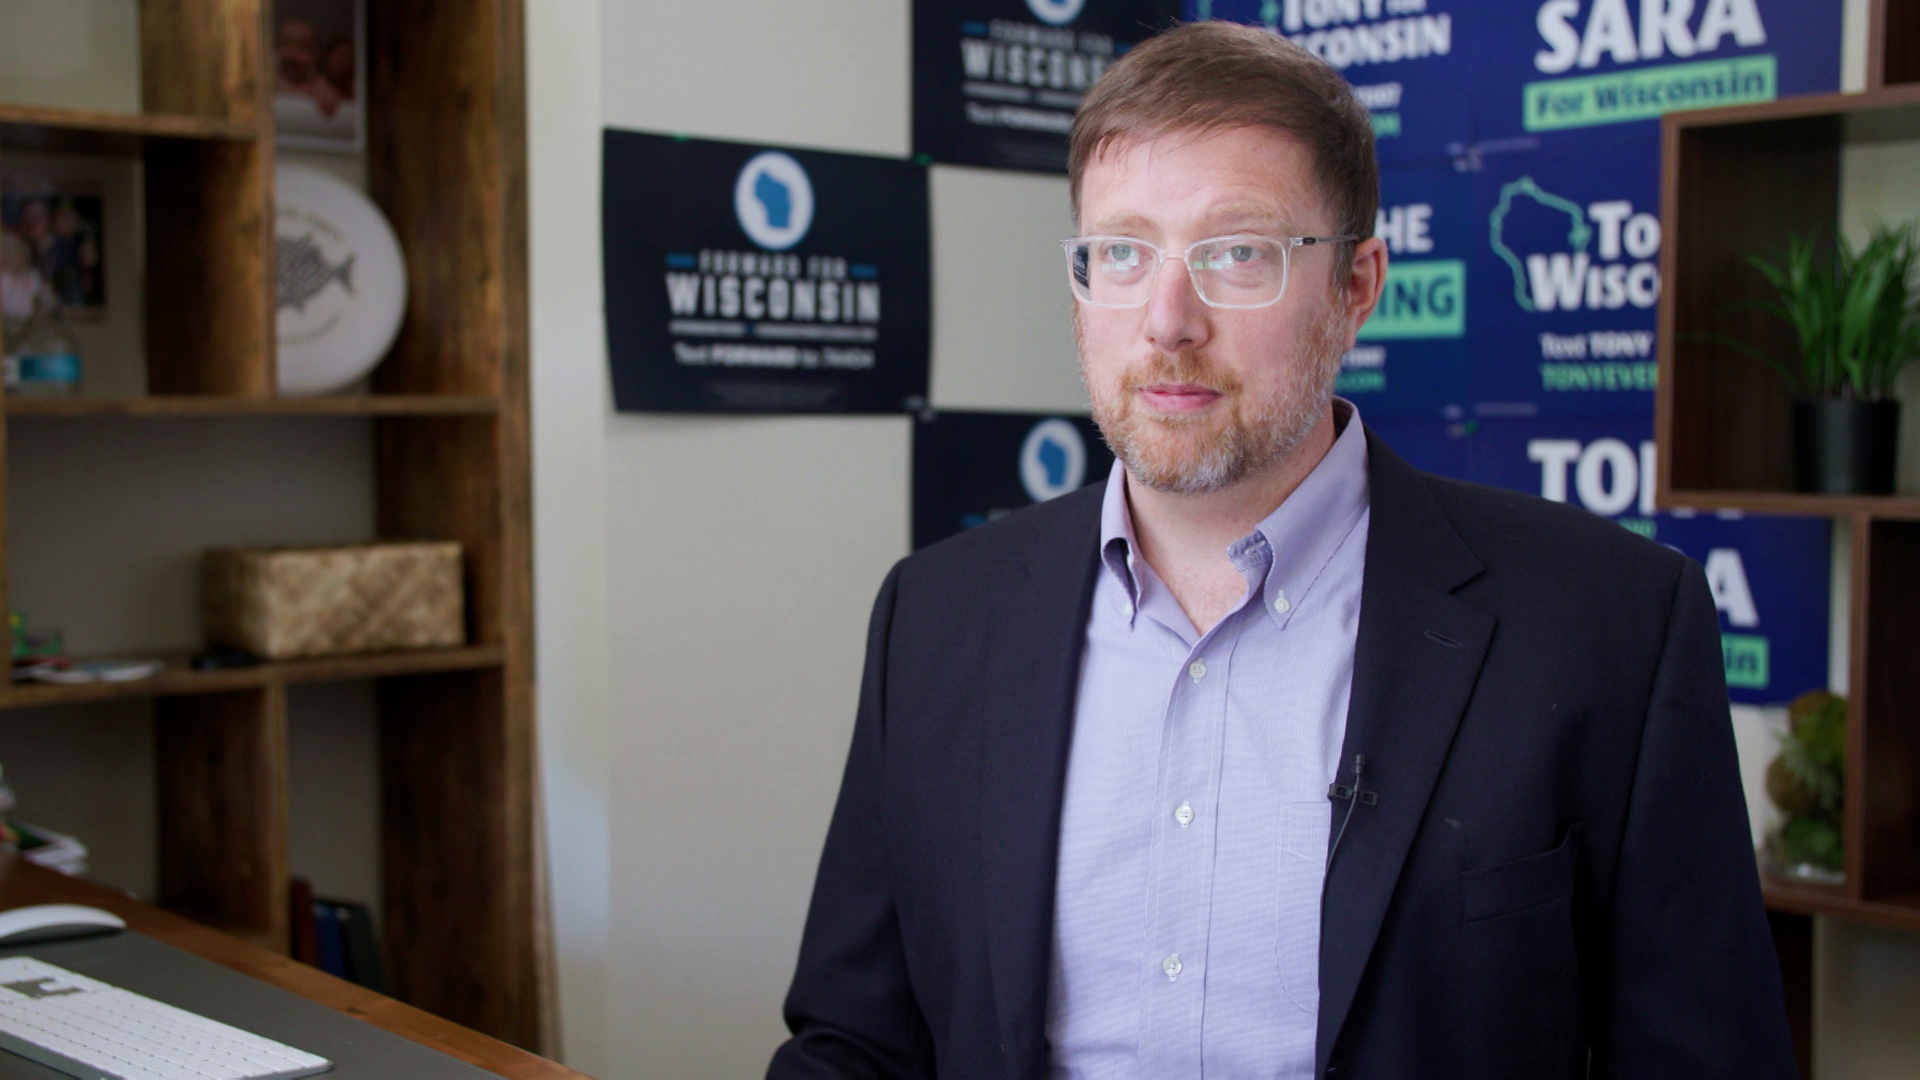 Ben Wikler sits in an office with wooden shelves with plants and other items in the background along with political posters for Democratic Party candidates in the 2022 elections.